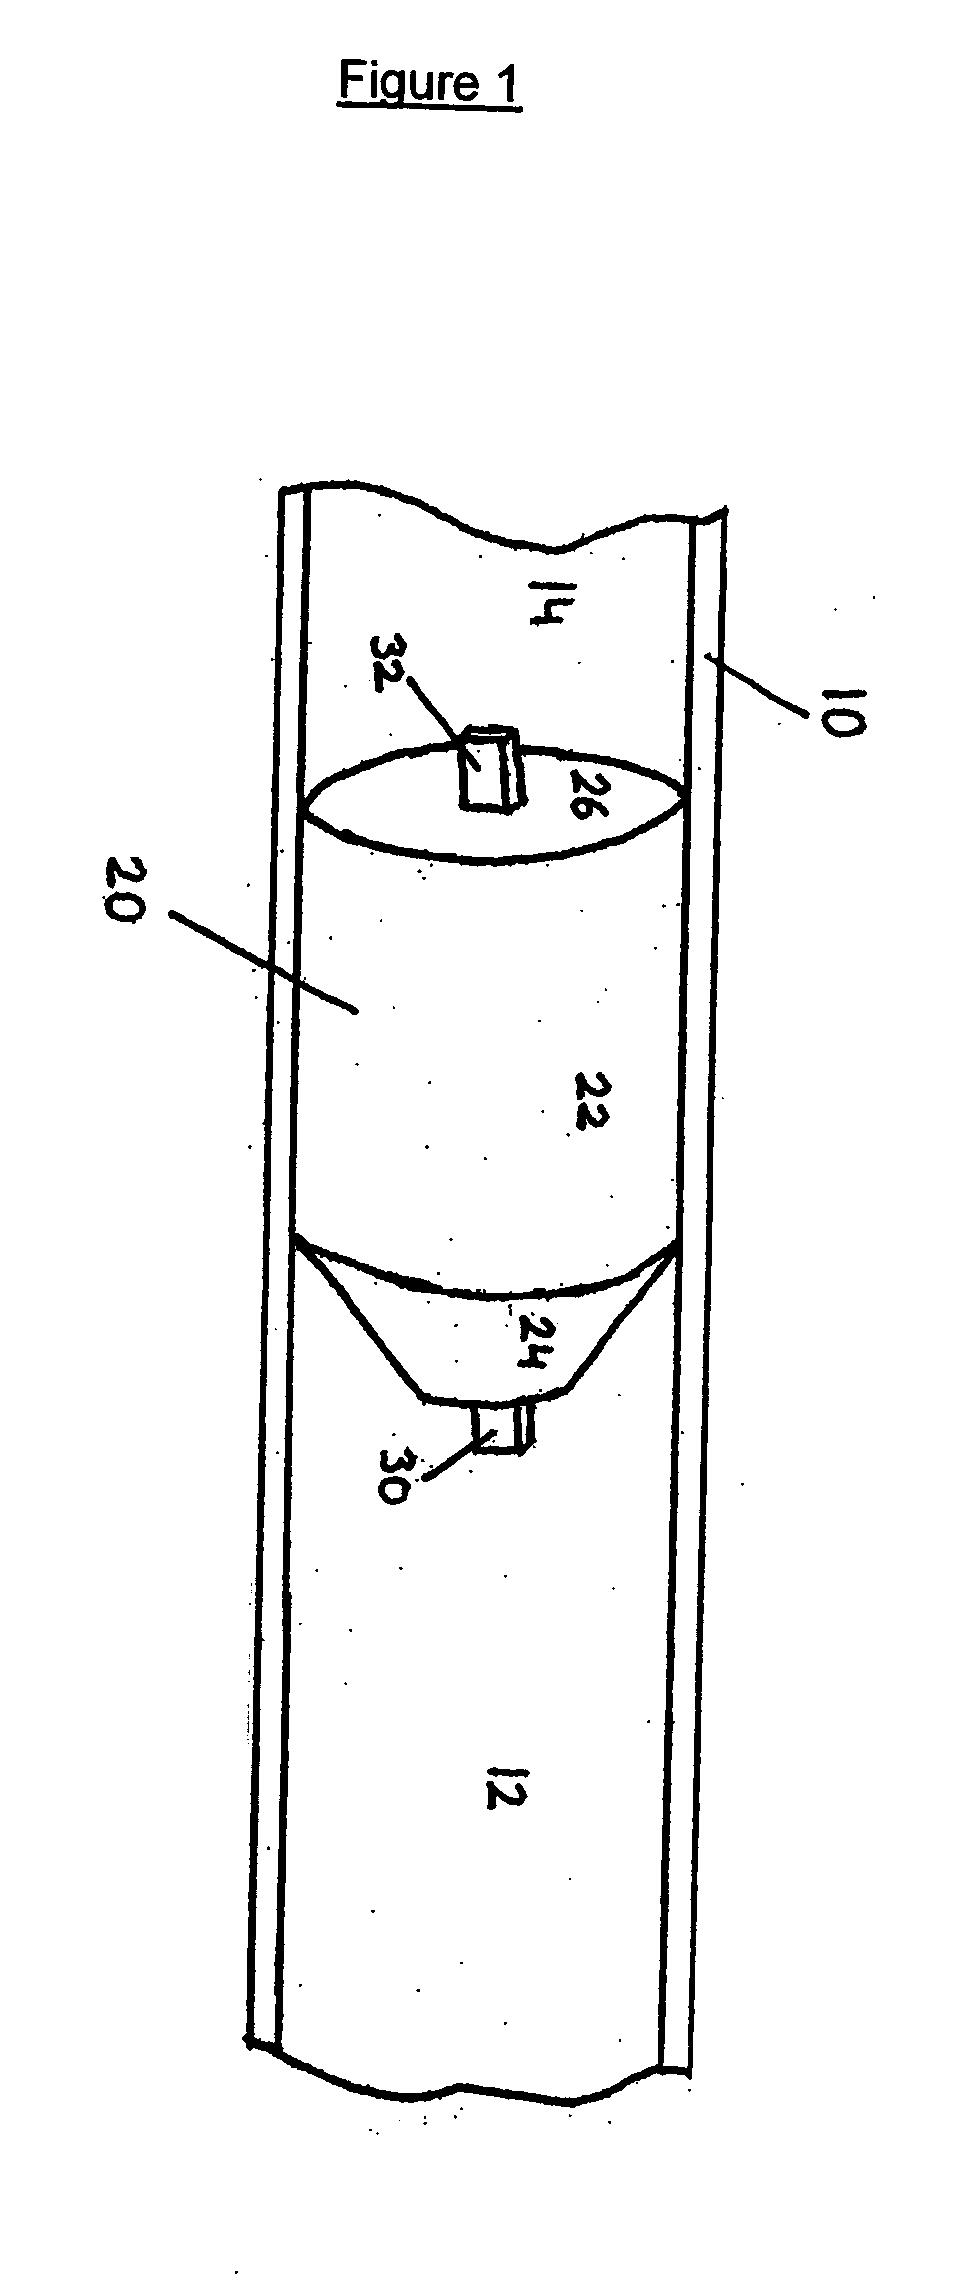 Method and apparatus for detecting the presence or absence of fluids in a pipeline